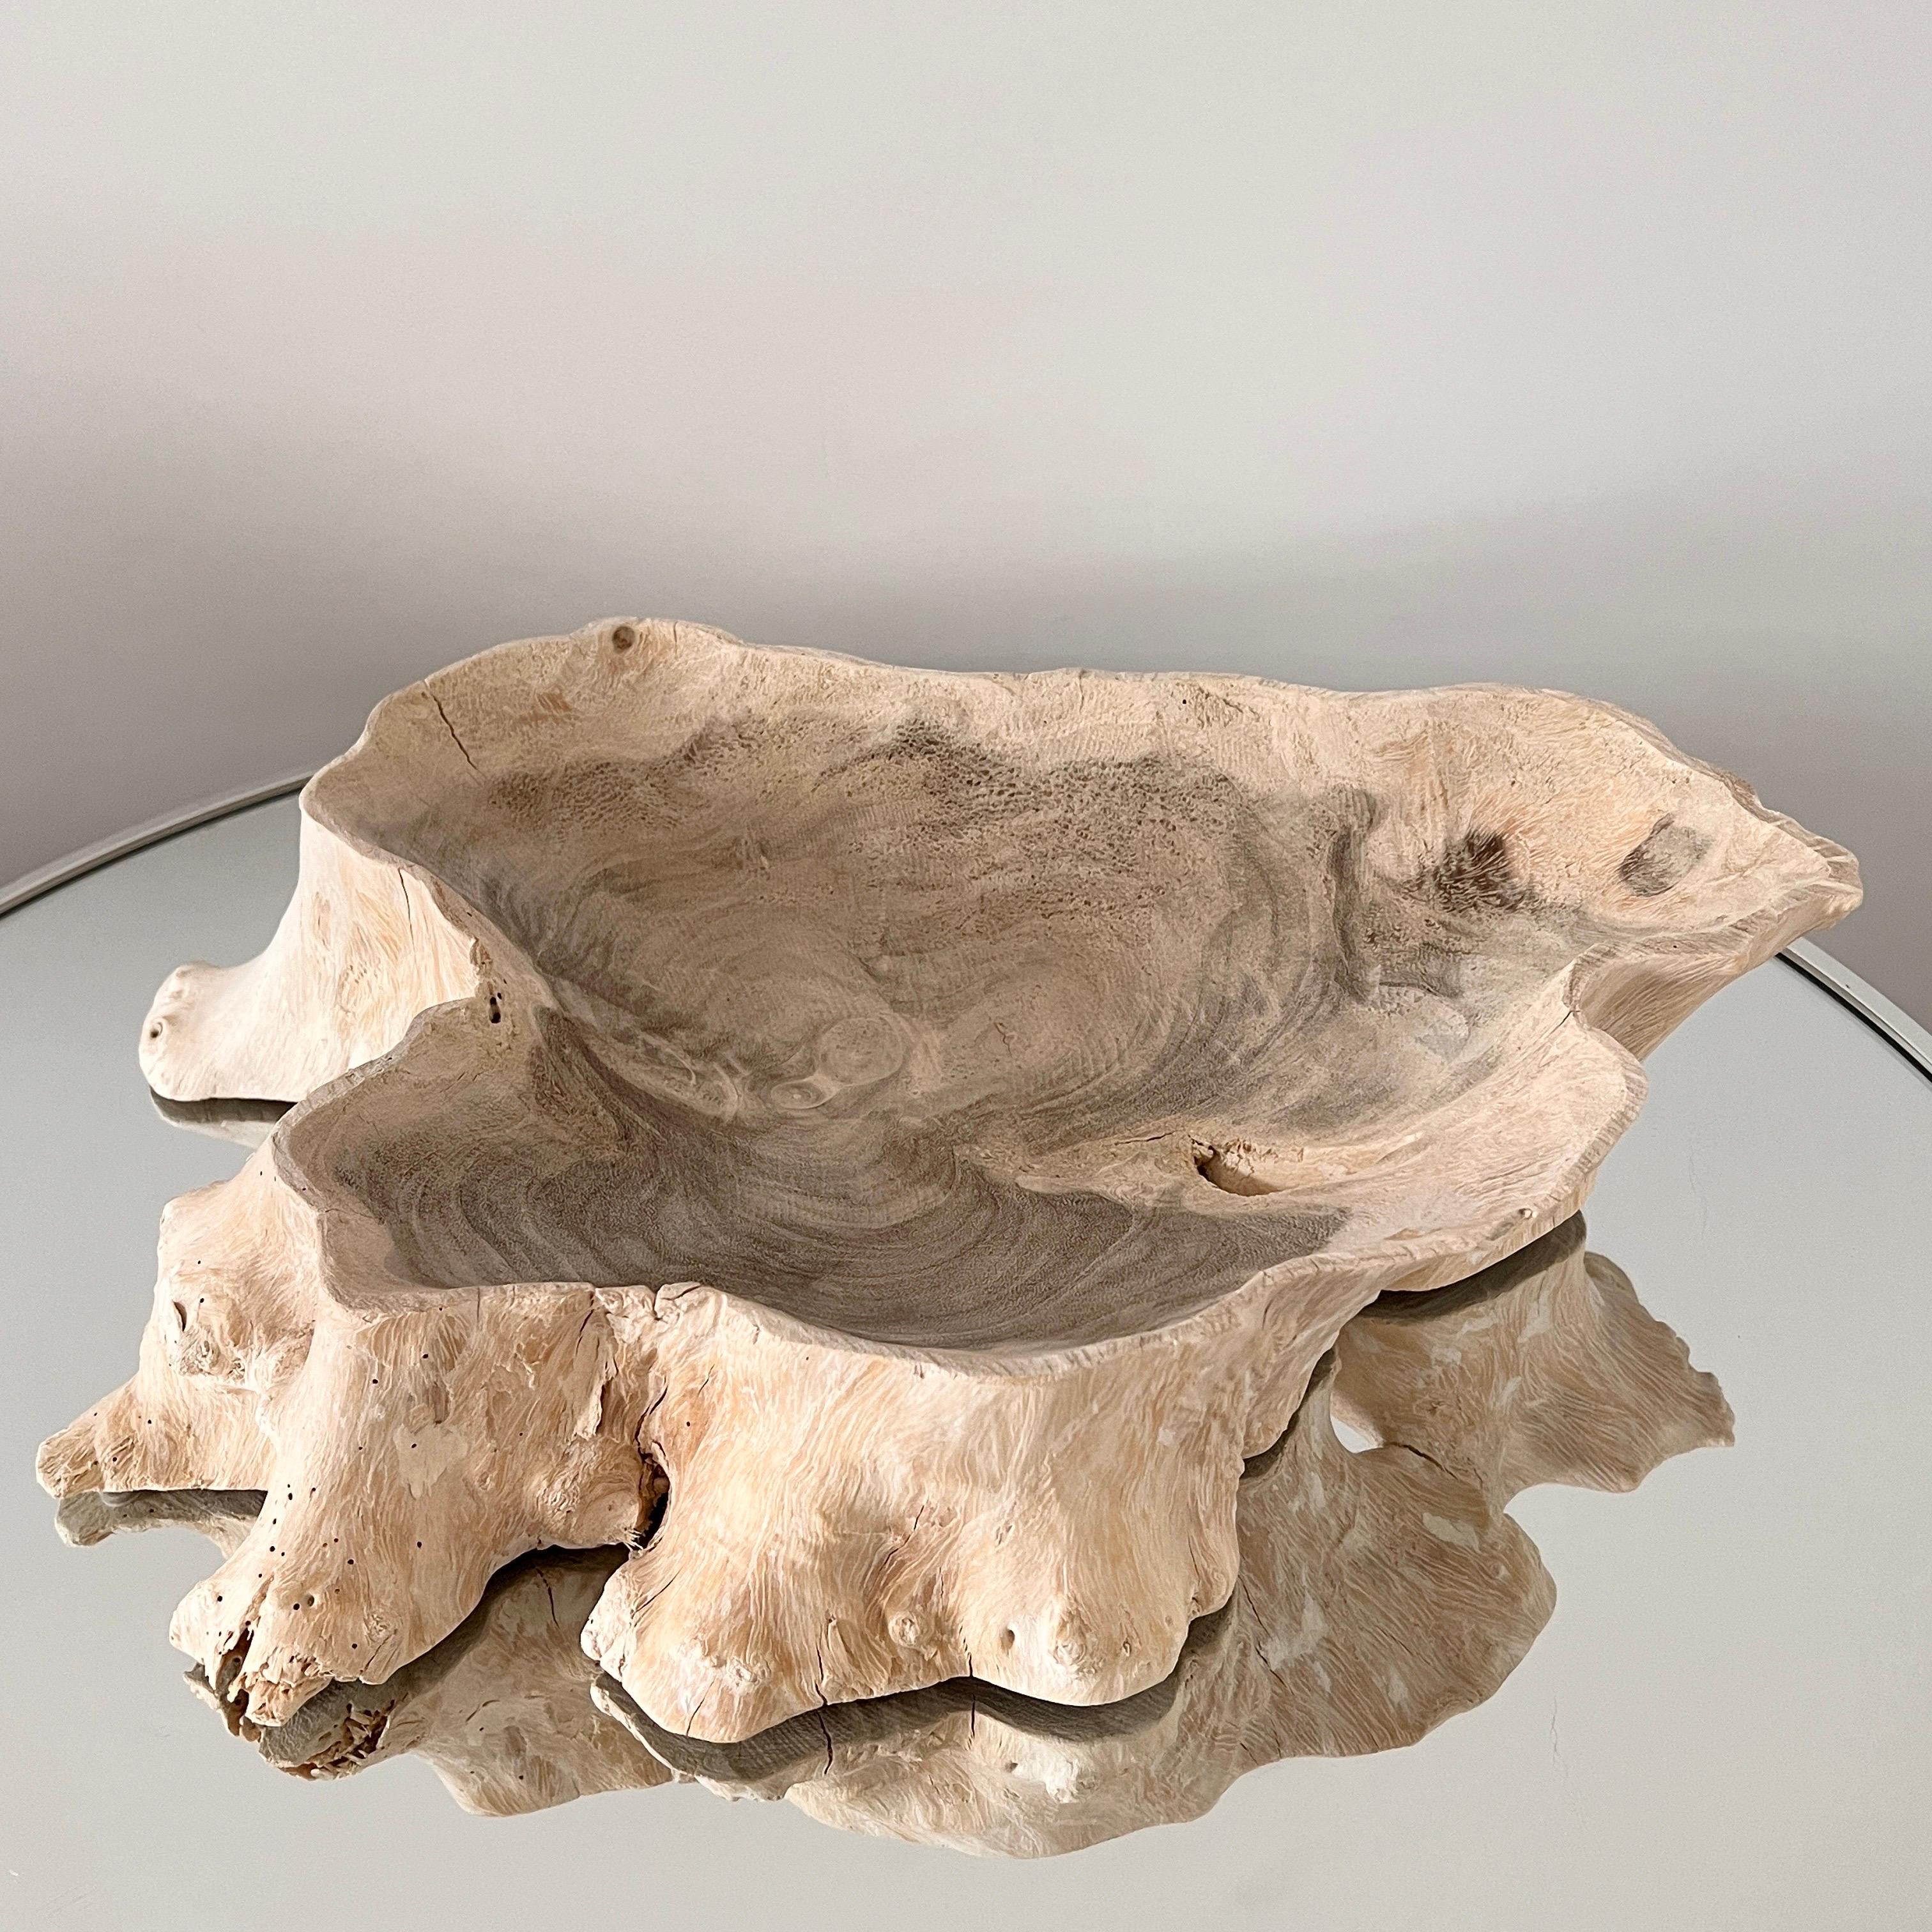 Organic Bleached Teak Root Wood Bowl with Live Edges, Indonesia 2